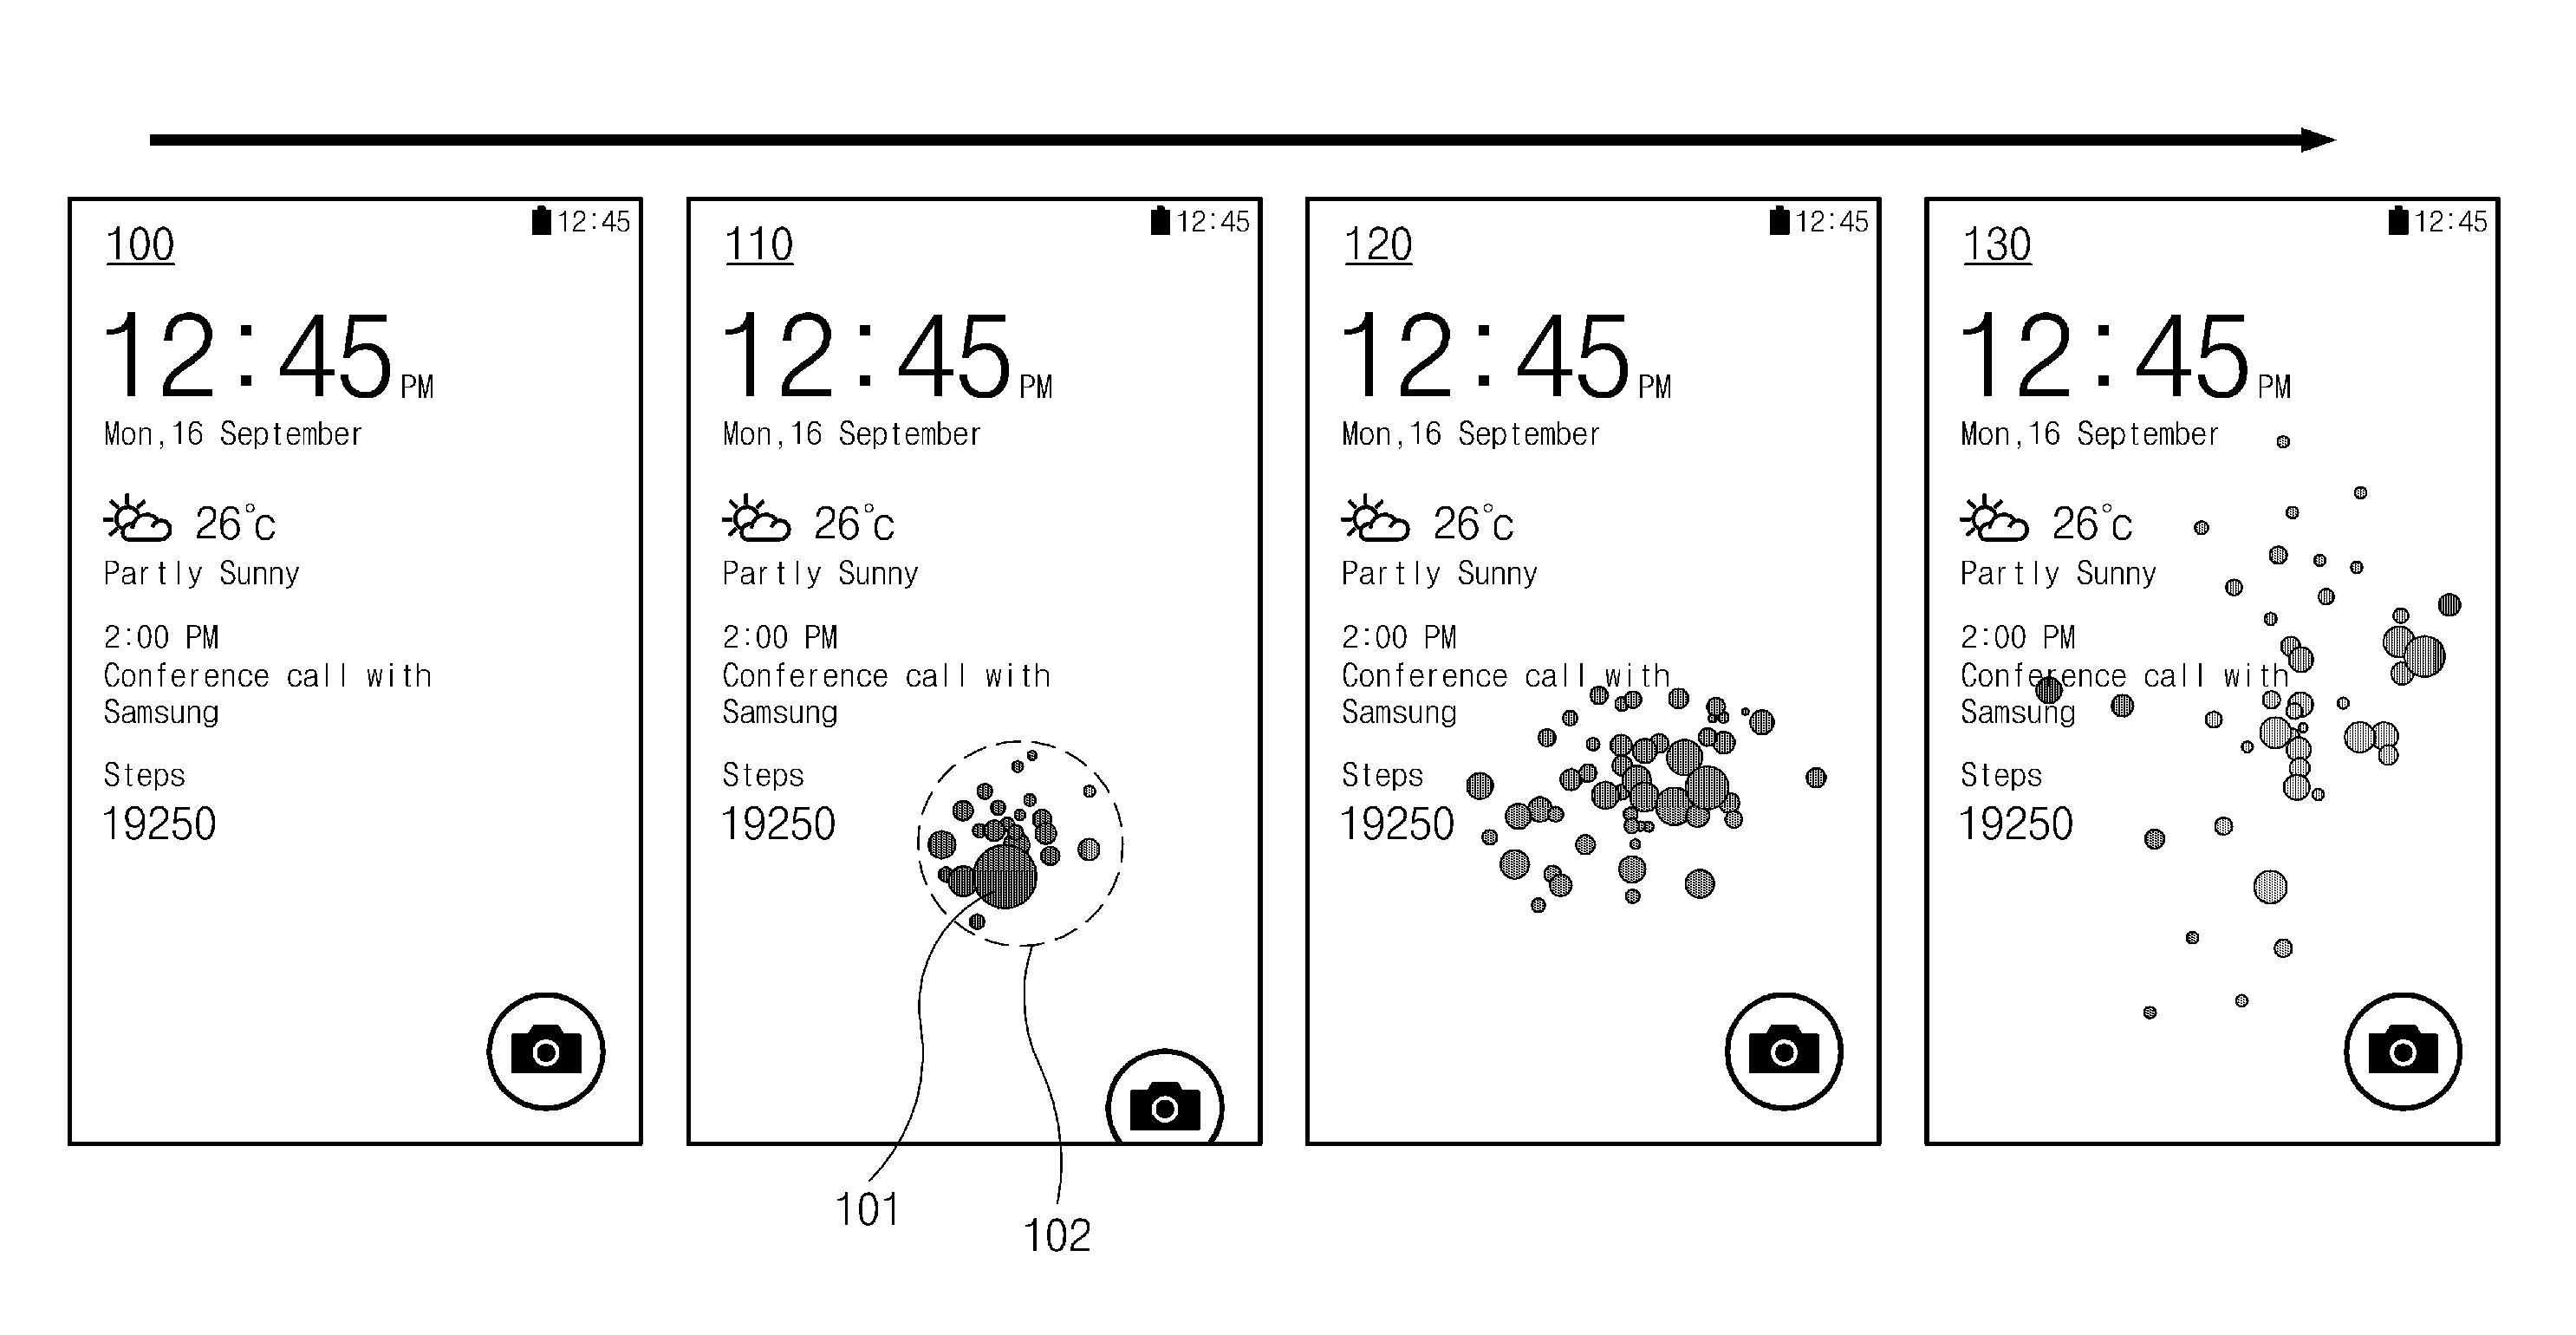 Displaying particle effect on screen of electronic device